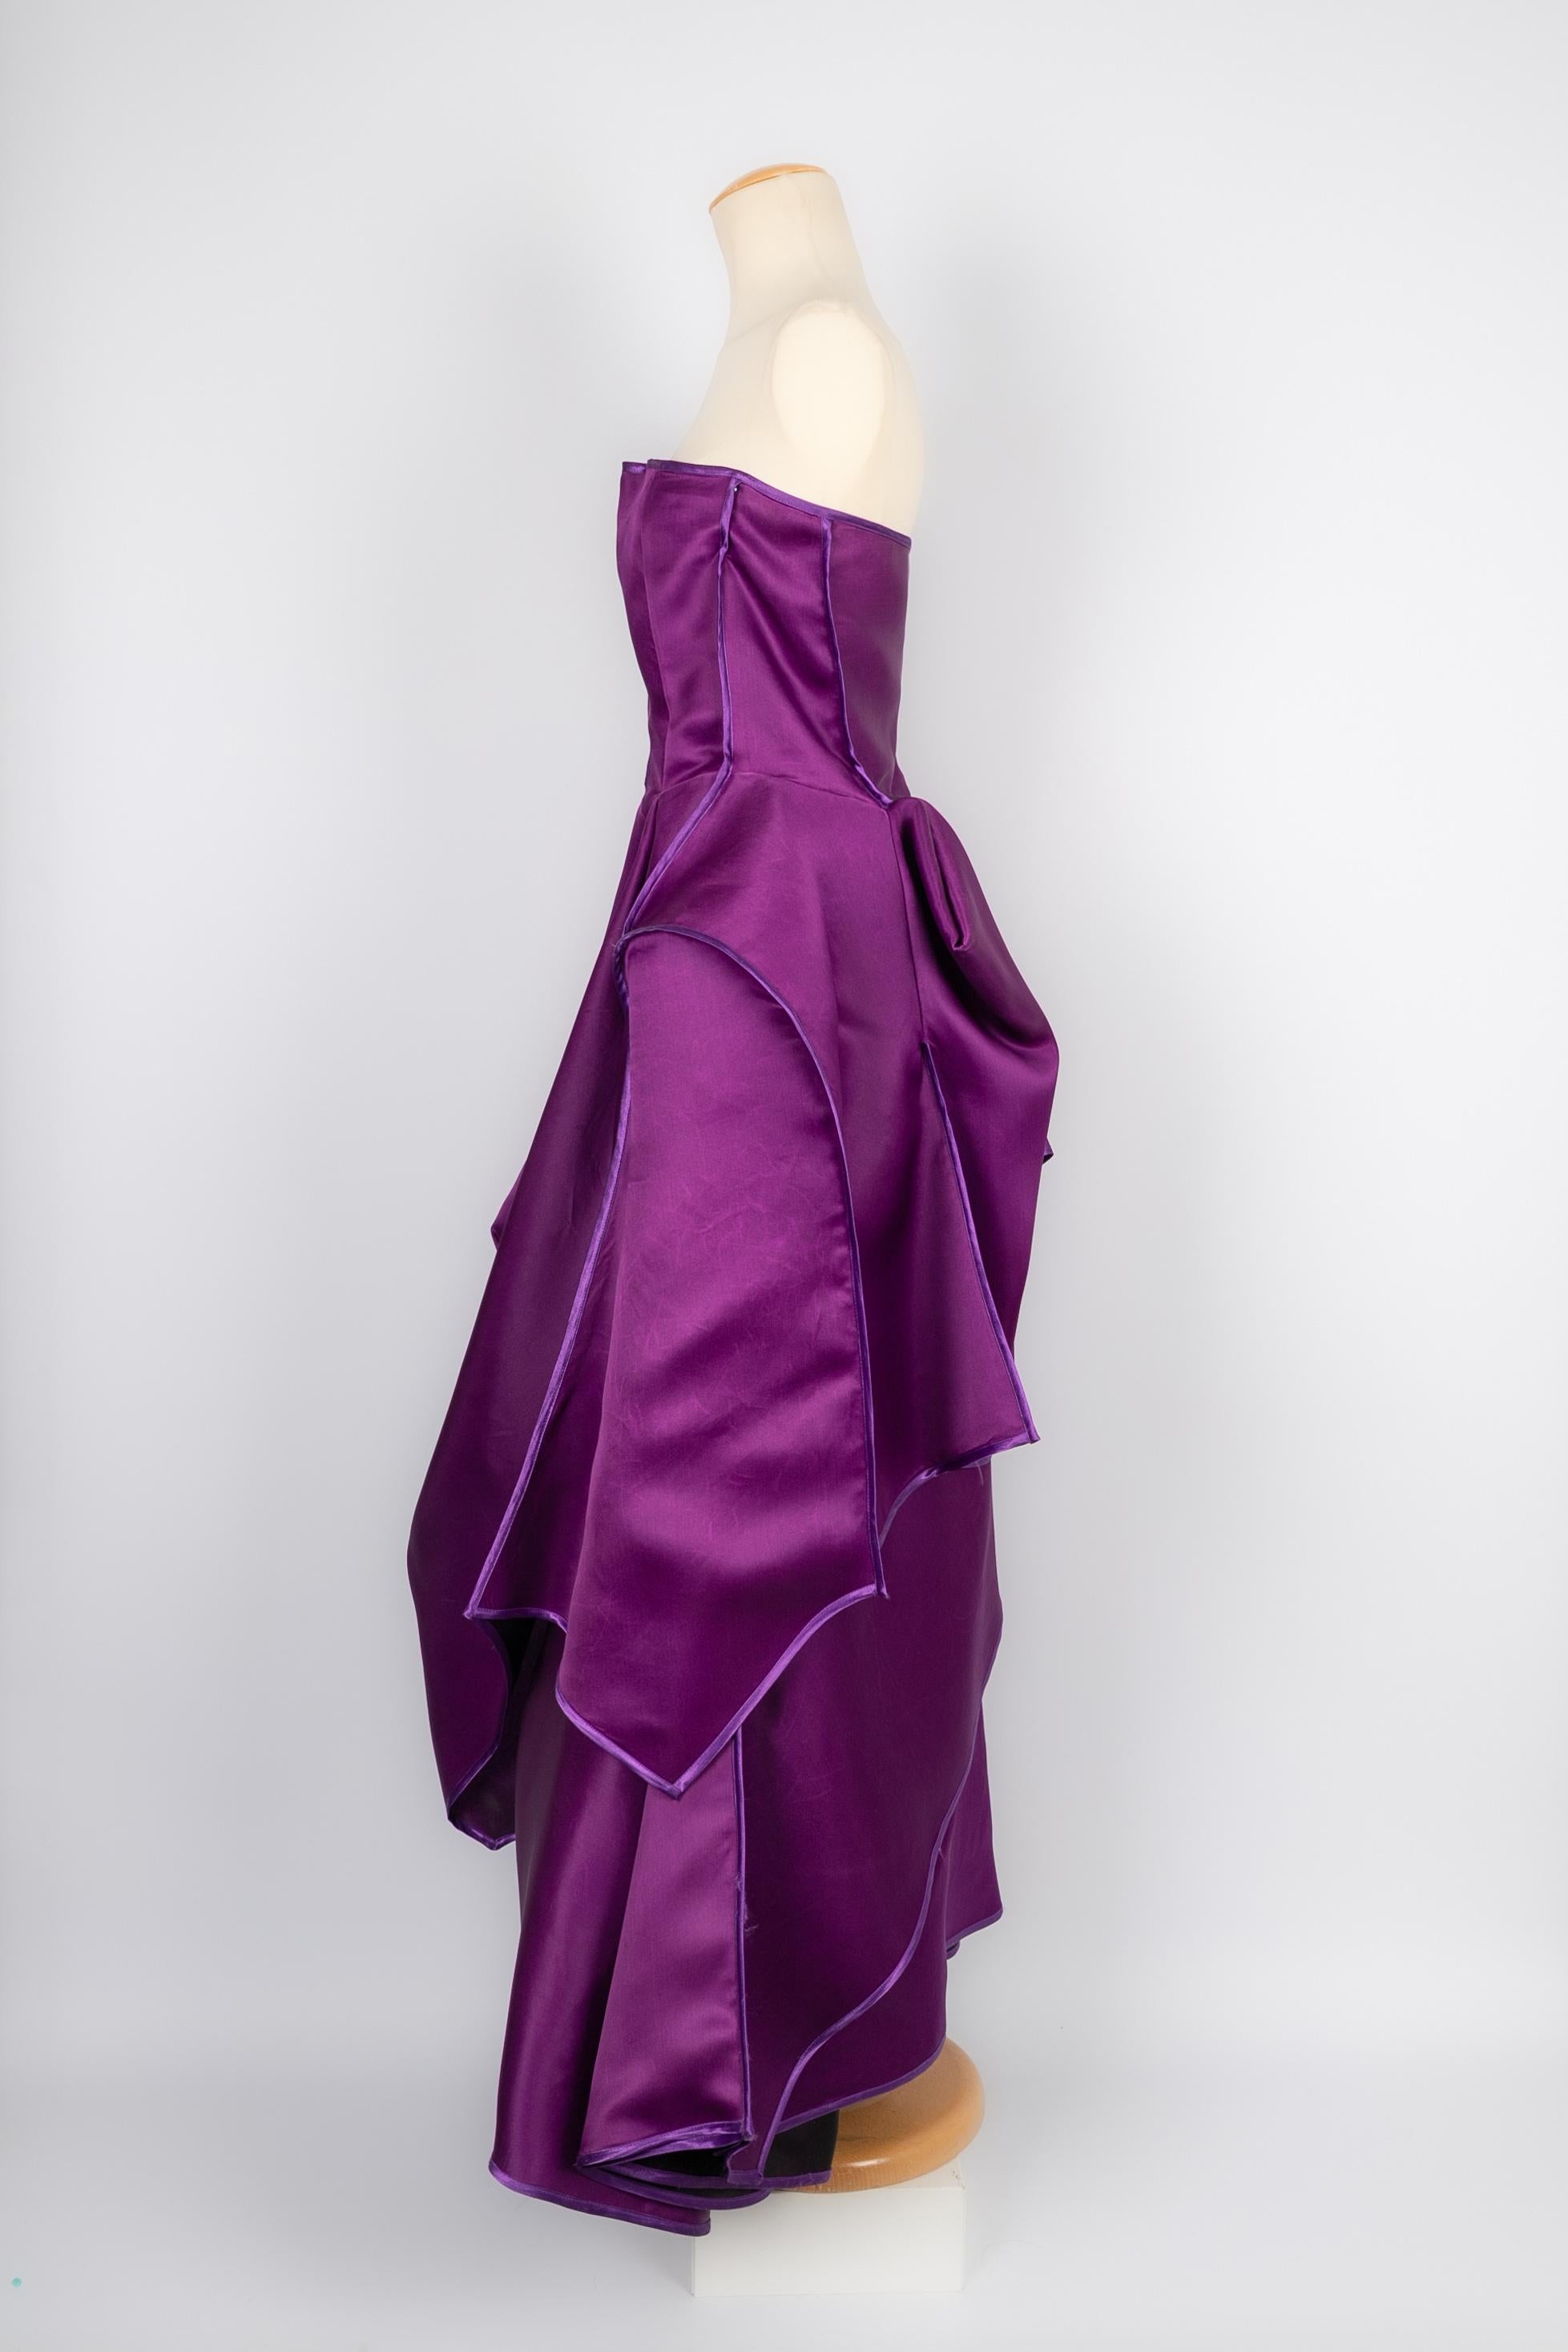 CHRISTIAN LACROIX - (Made in France) Long bustier dress in silk taffeta and purple satin. 40FR size indicated. To be mentioned, a few stains on the taffeta.

Condition:
Good condition

Dimensions:
Chest: 38 cm - Waist: 35 cm - Length: about 130